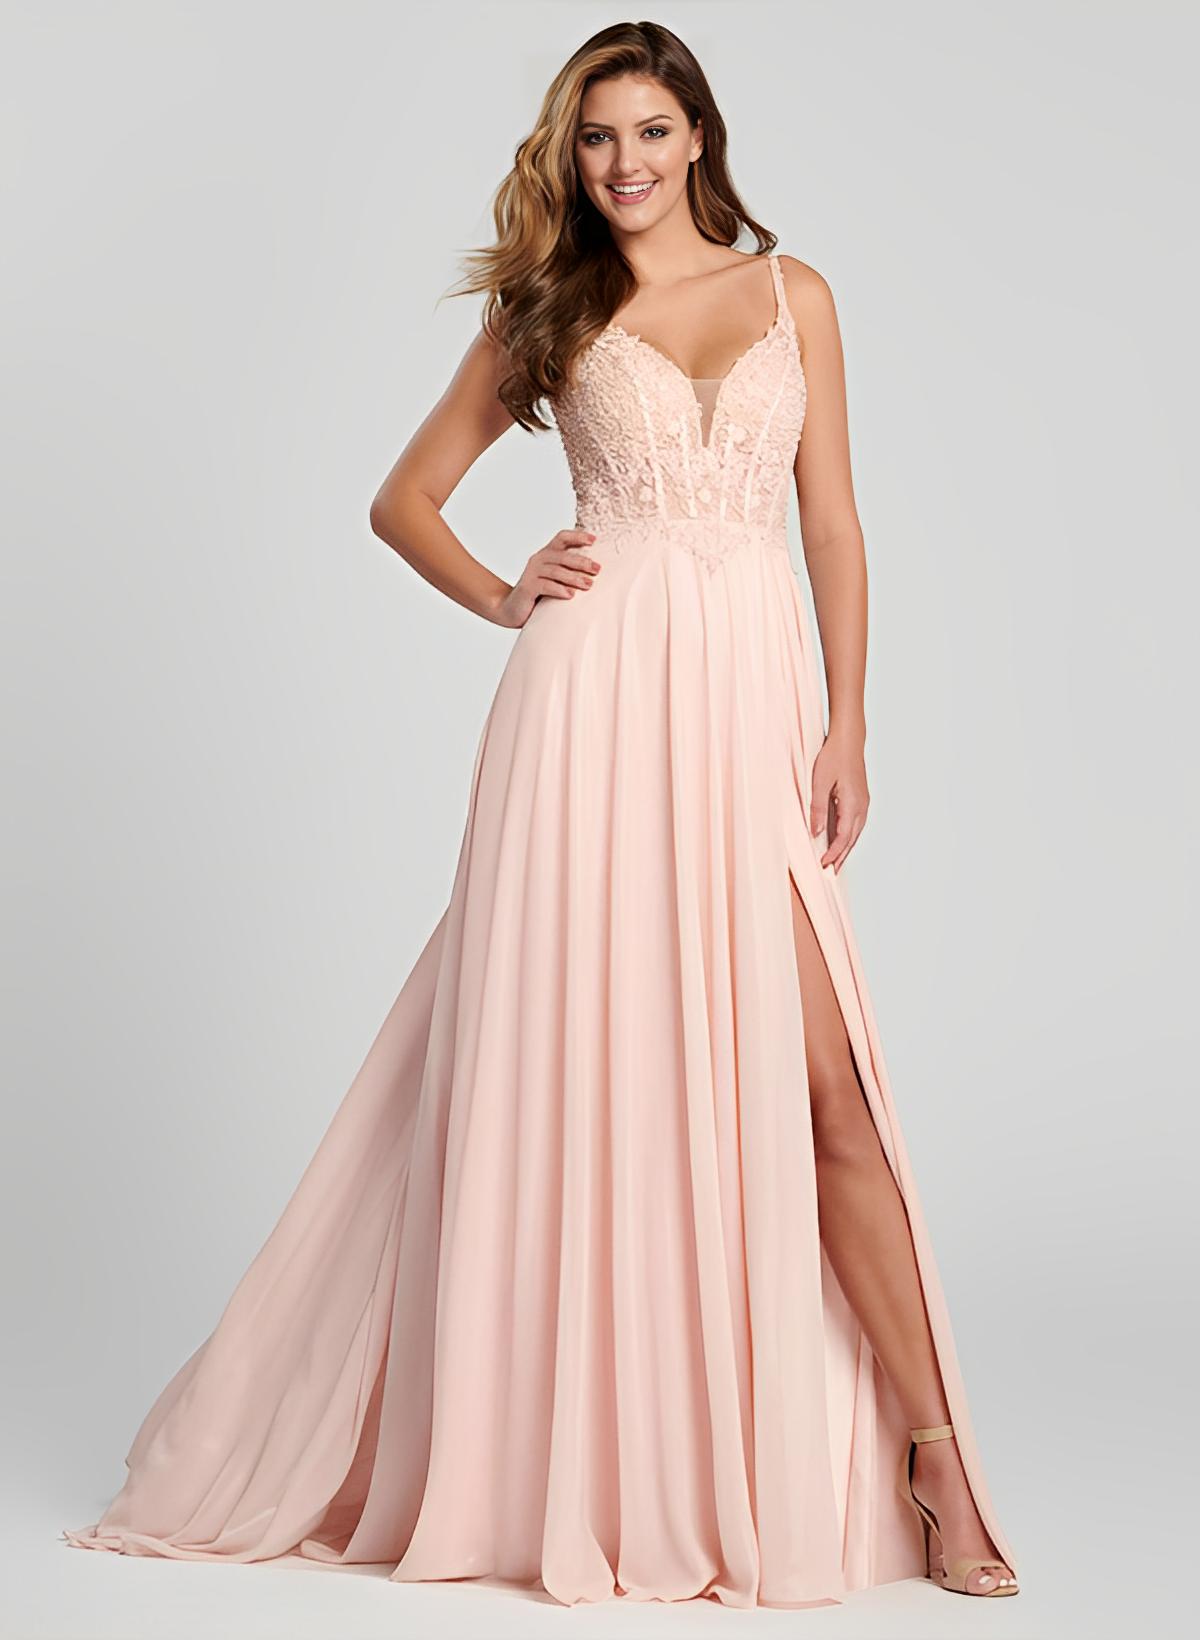 A-Line V-Neck Sleeveless Chiffon Floor-Length Evening Dresses With Lace Back Hole Split Front